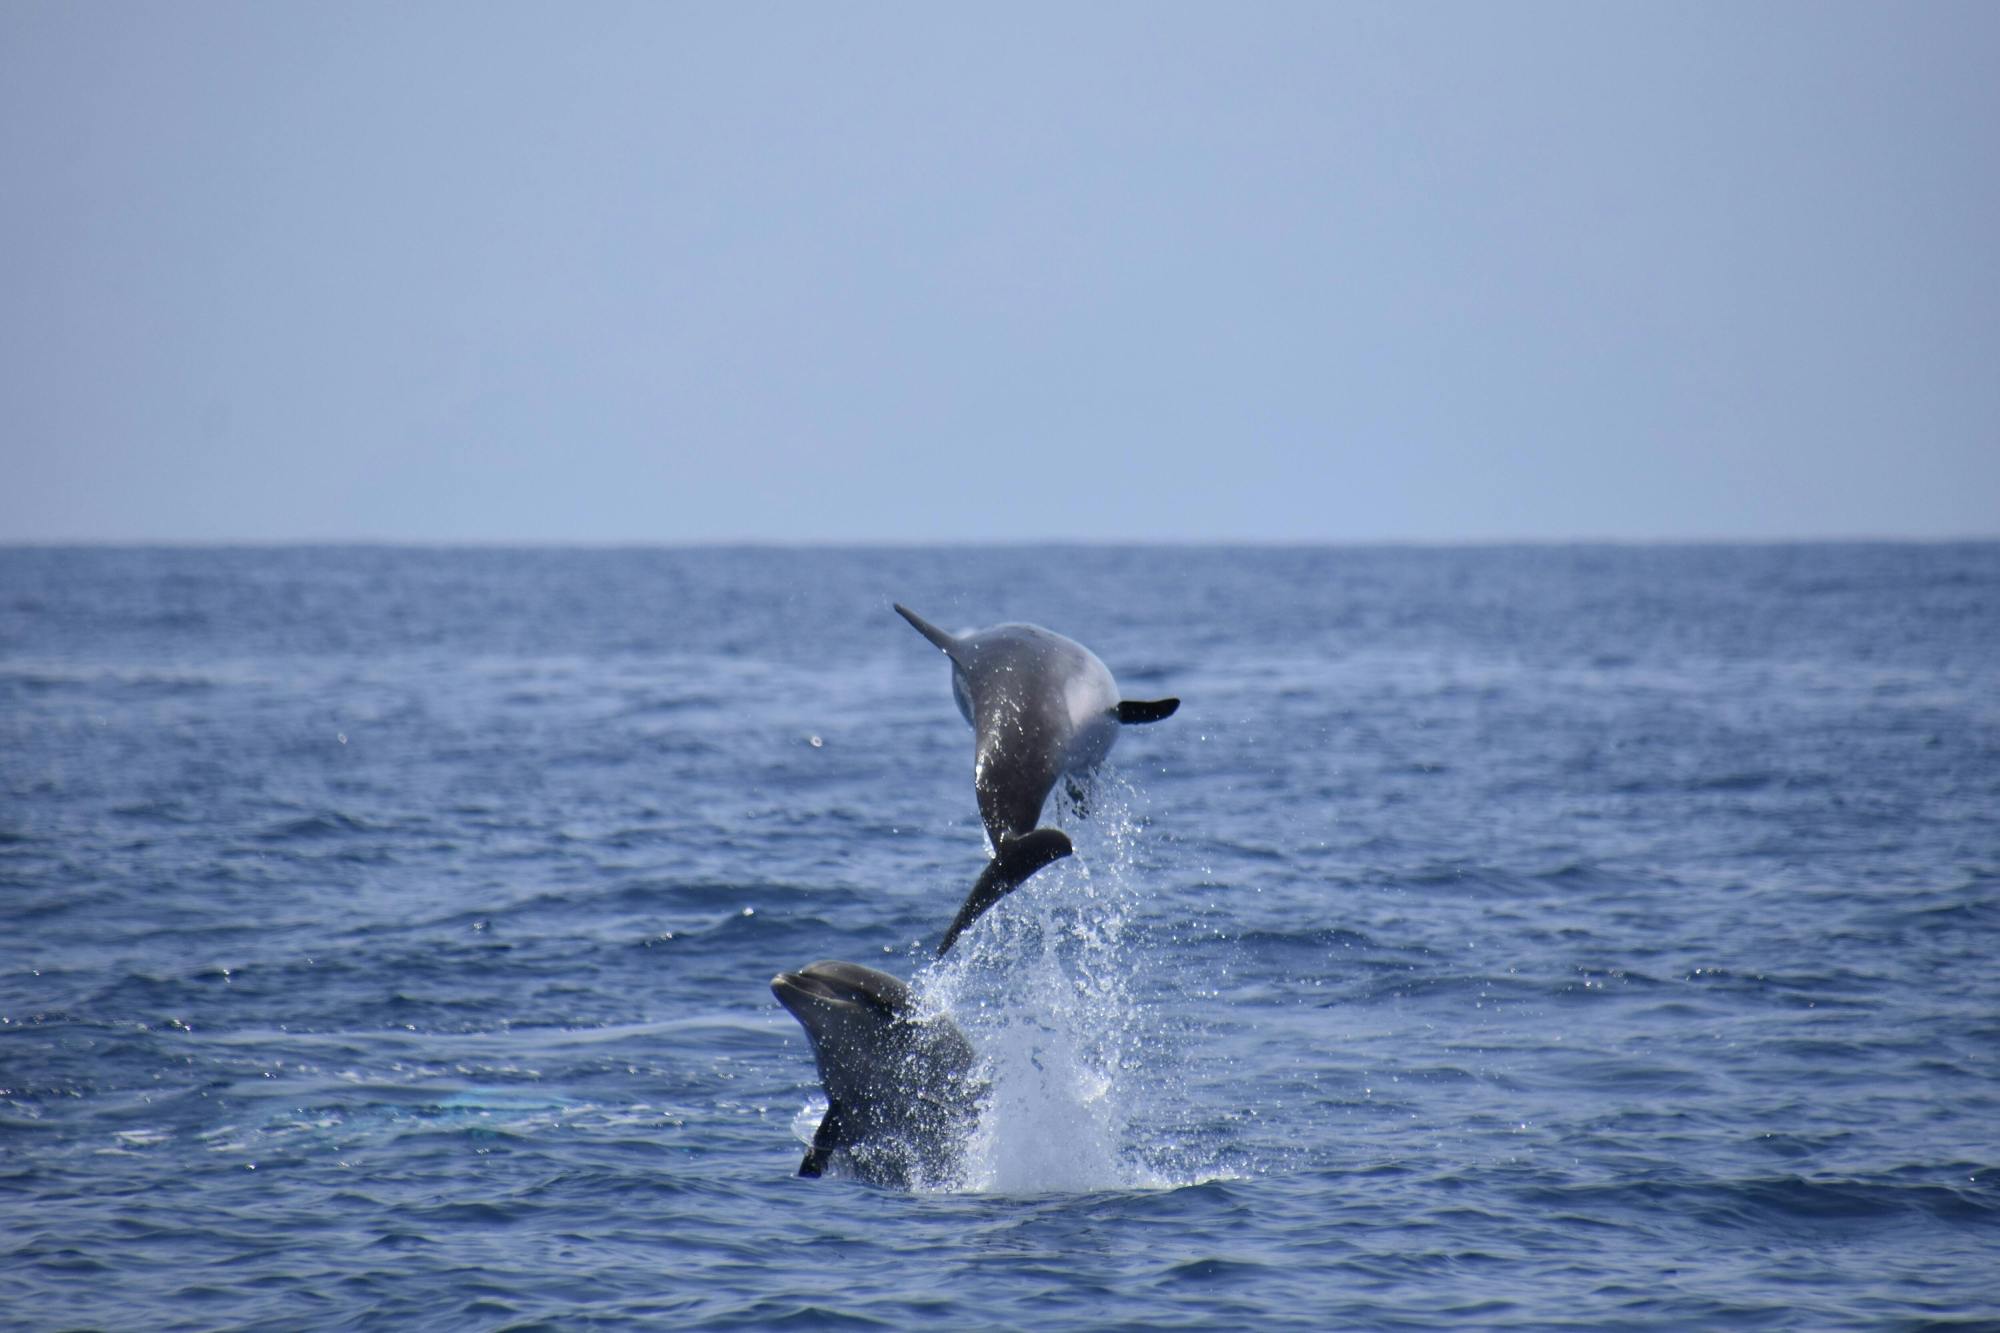 Tenerife Whale & Dolphin Eco Boat Trip